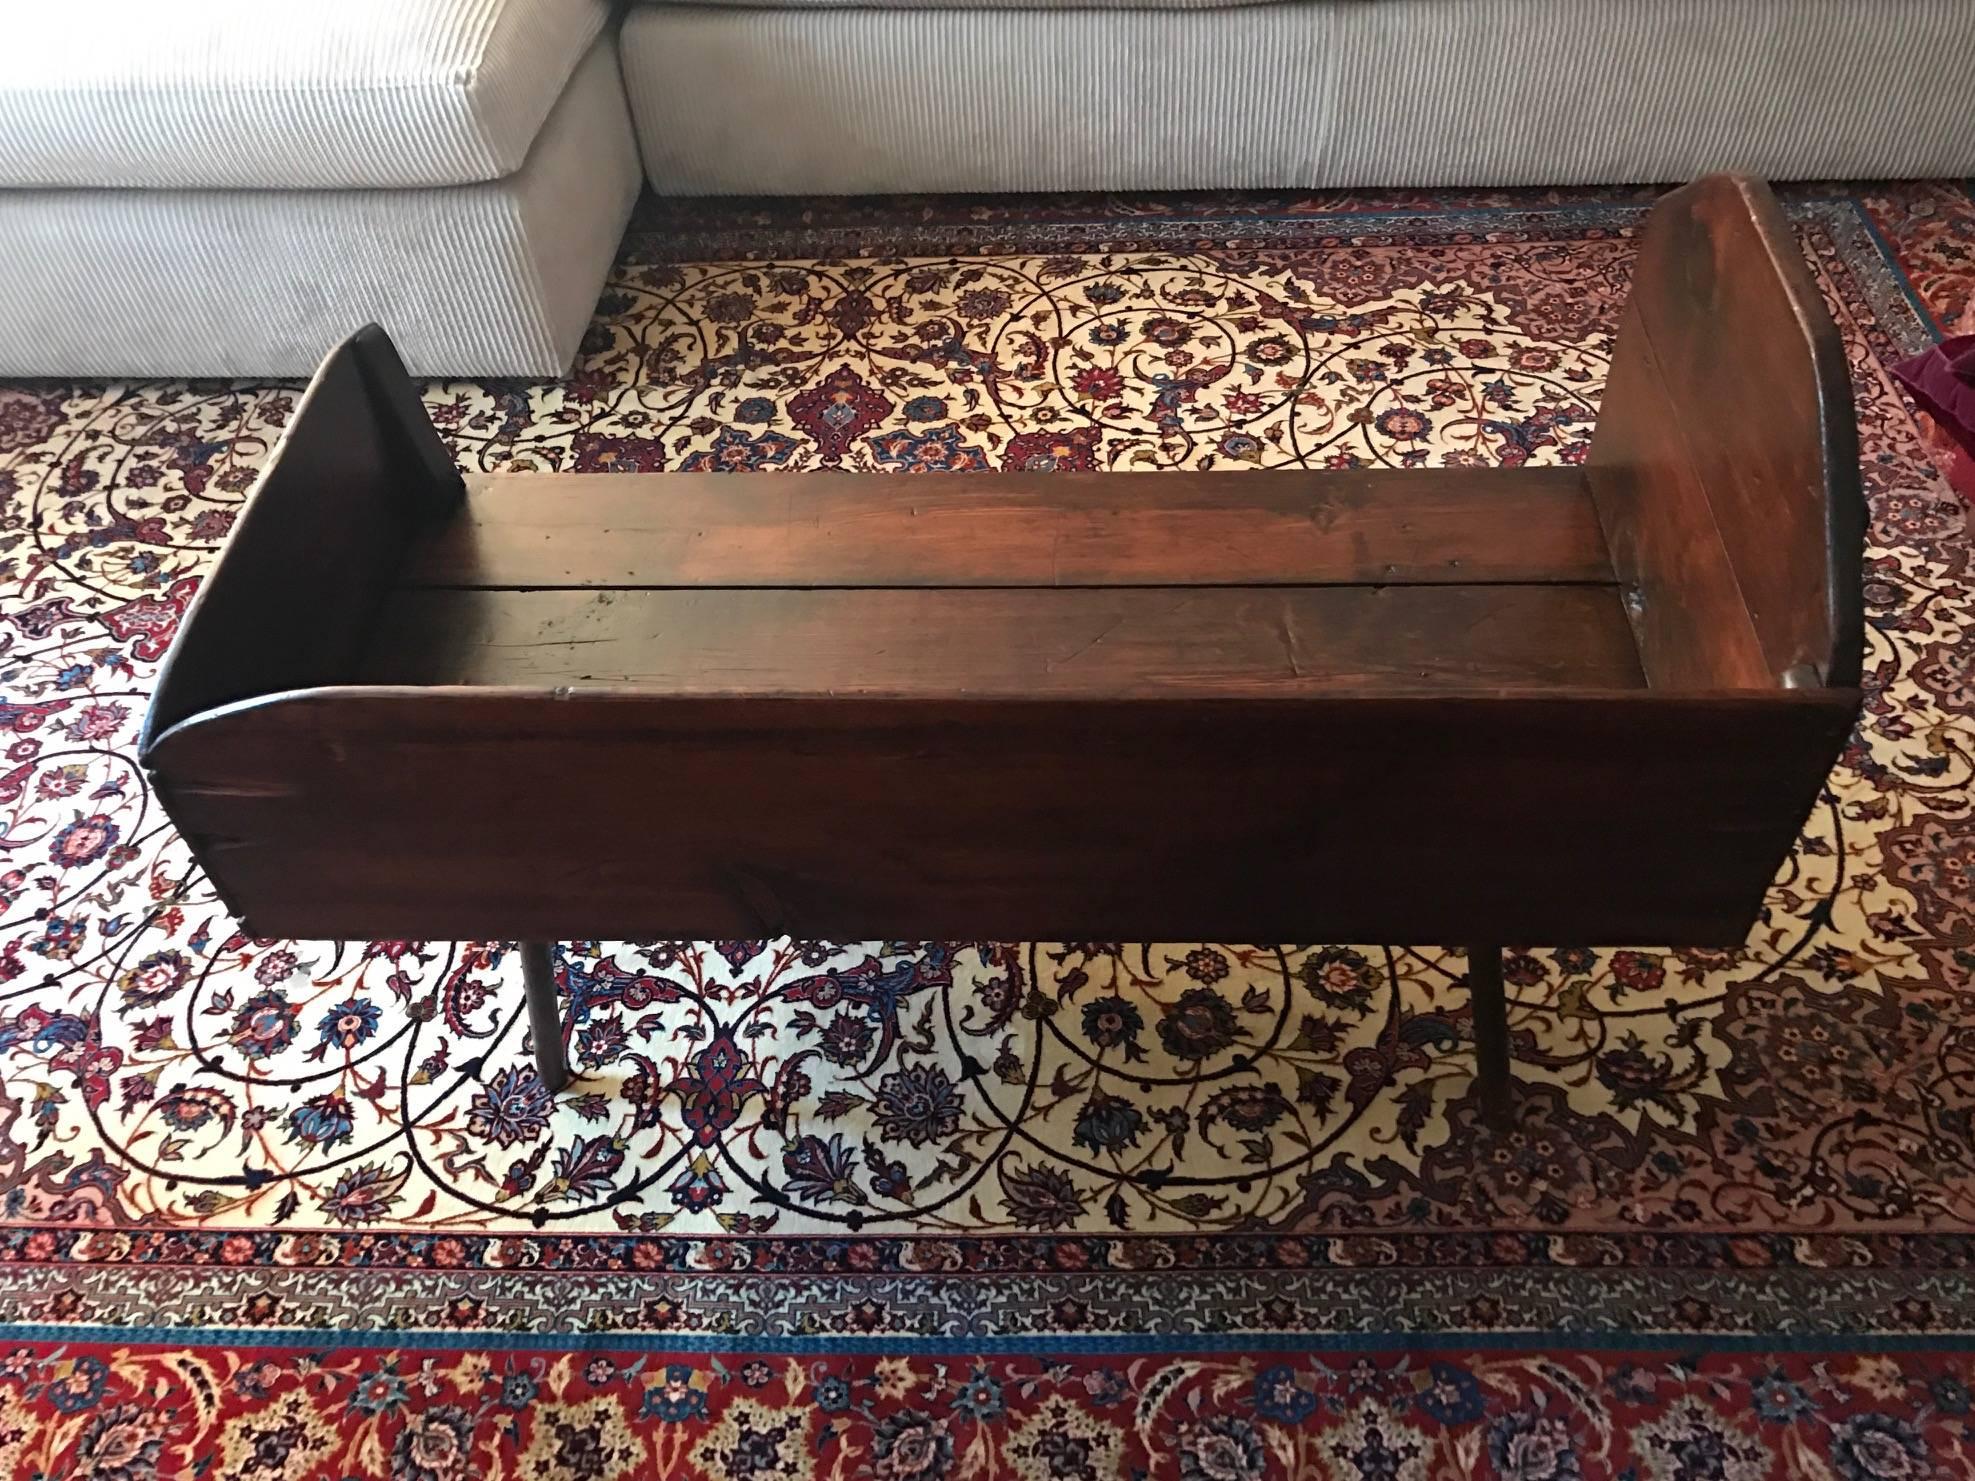 Really Cool Mahogany Vintage Cradle Made into a Cool Coffee or Center Table 2